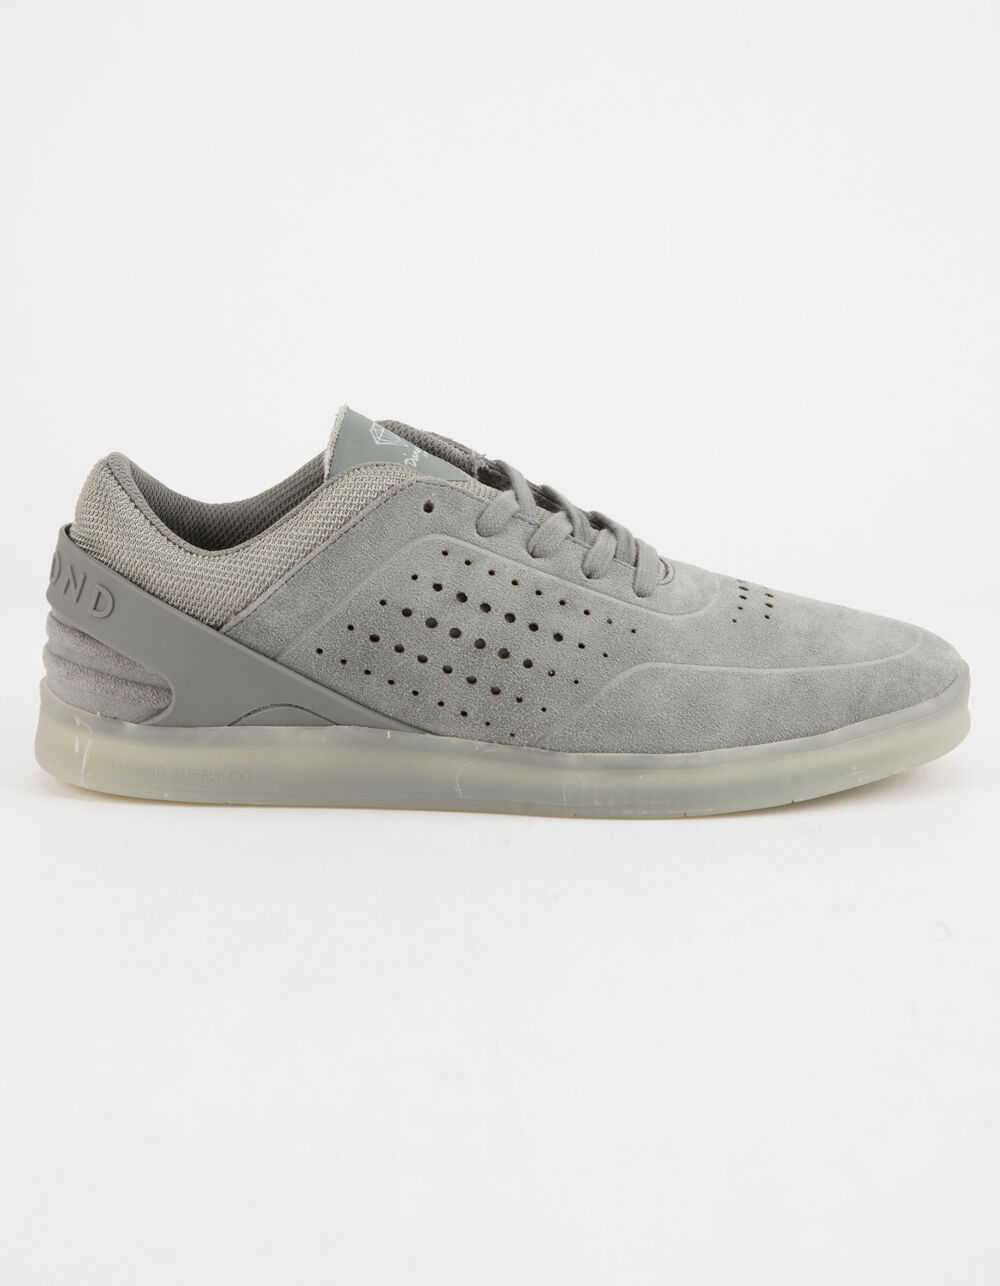 DIAMOND SUPPLY CO. Graphite Mens Shoes image number 0